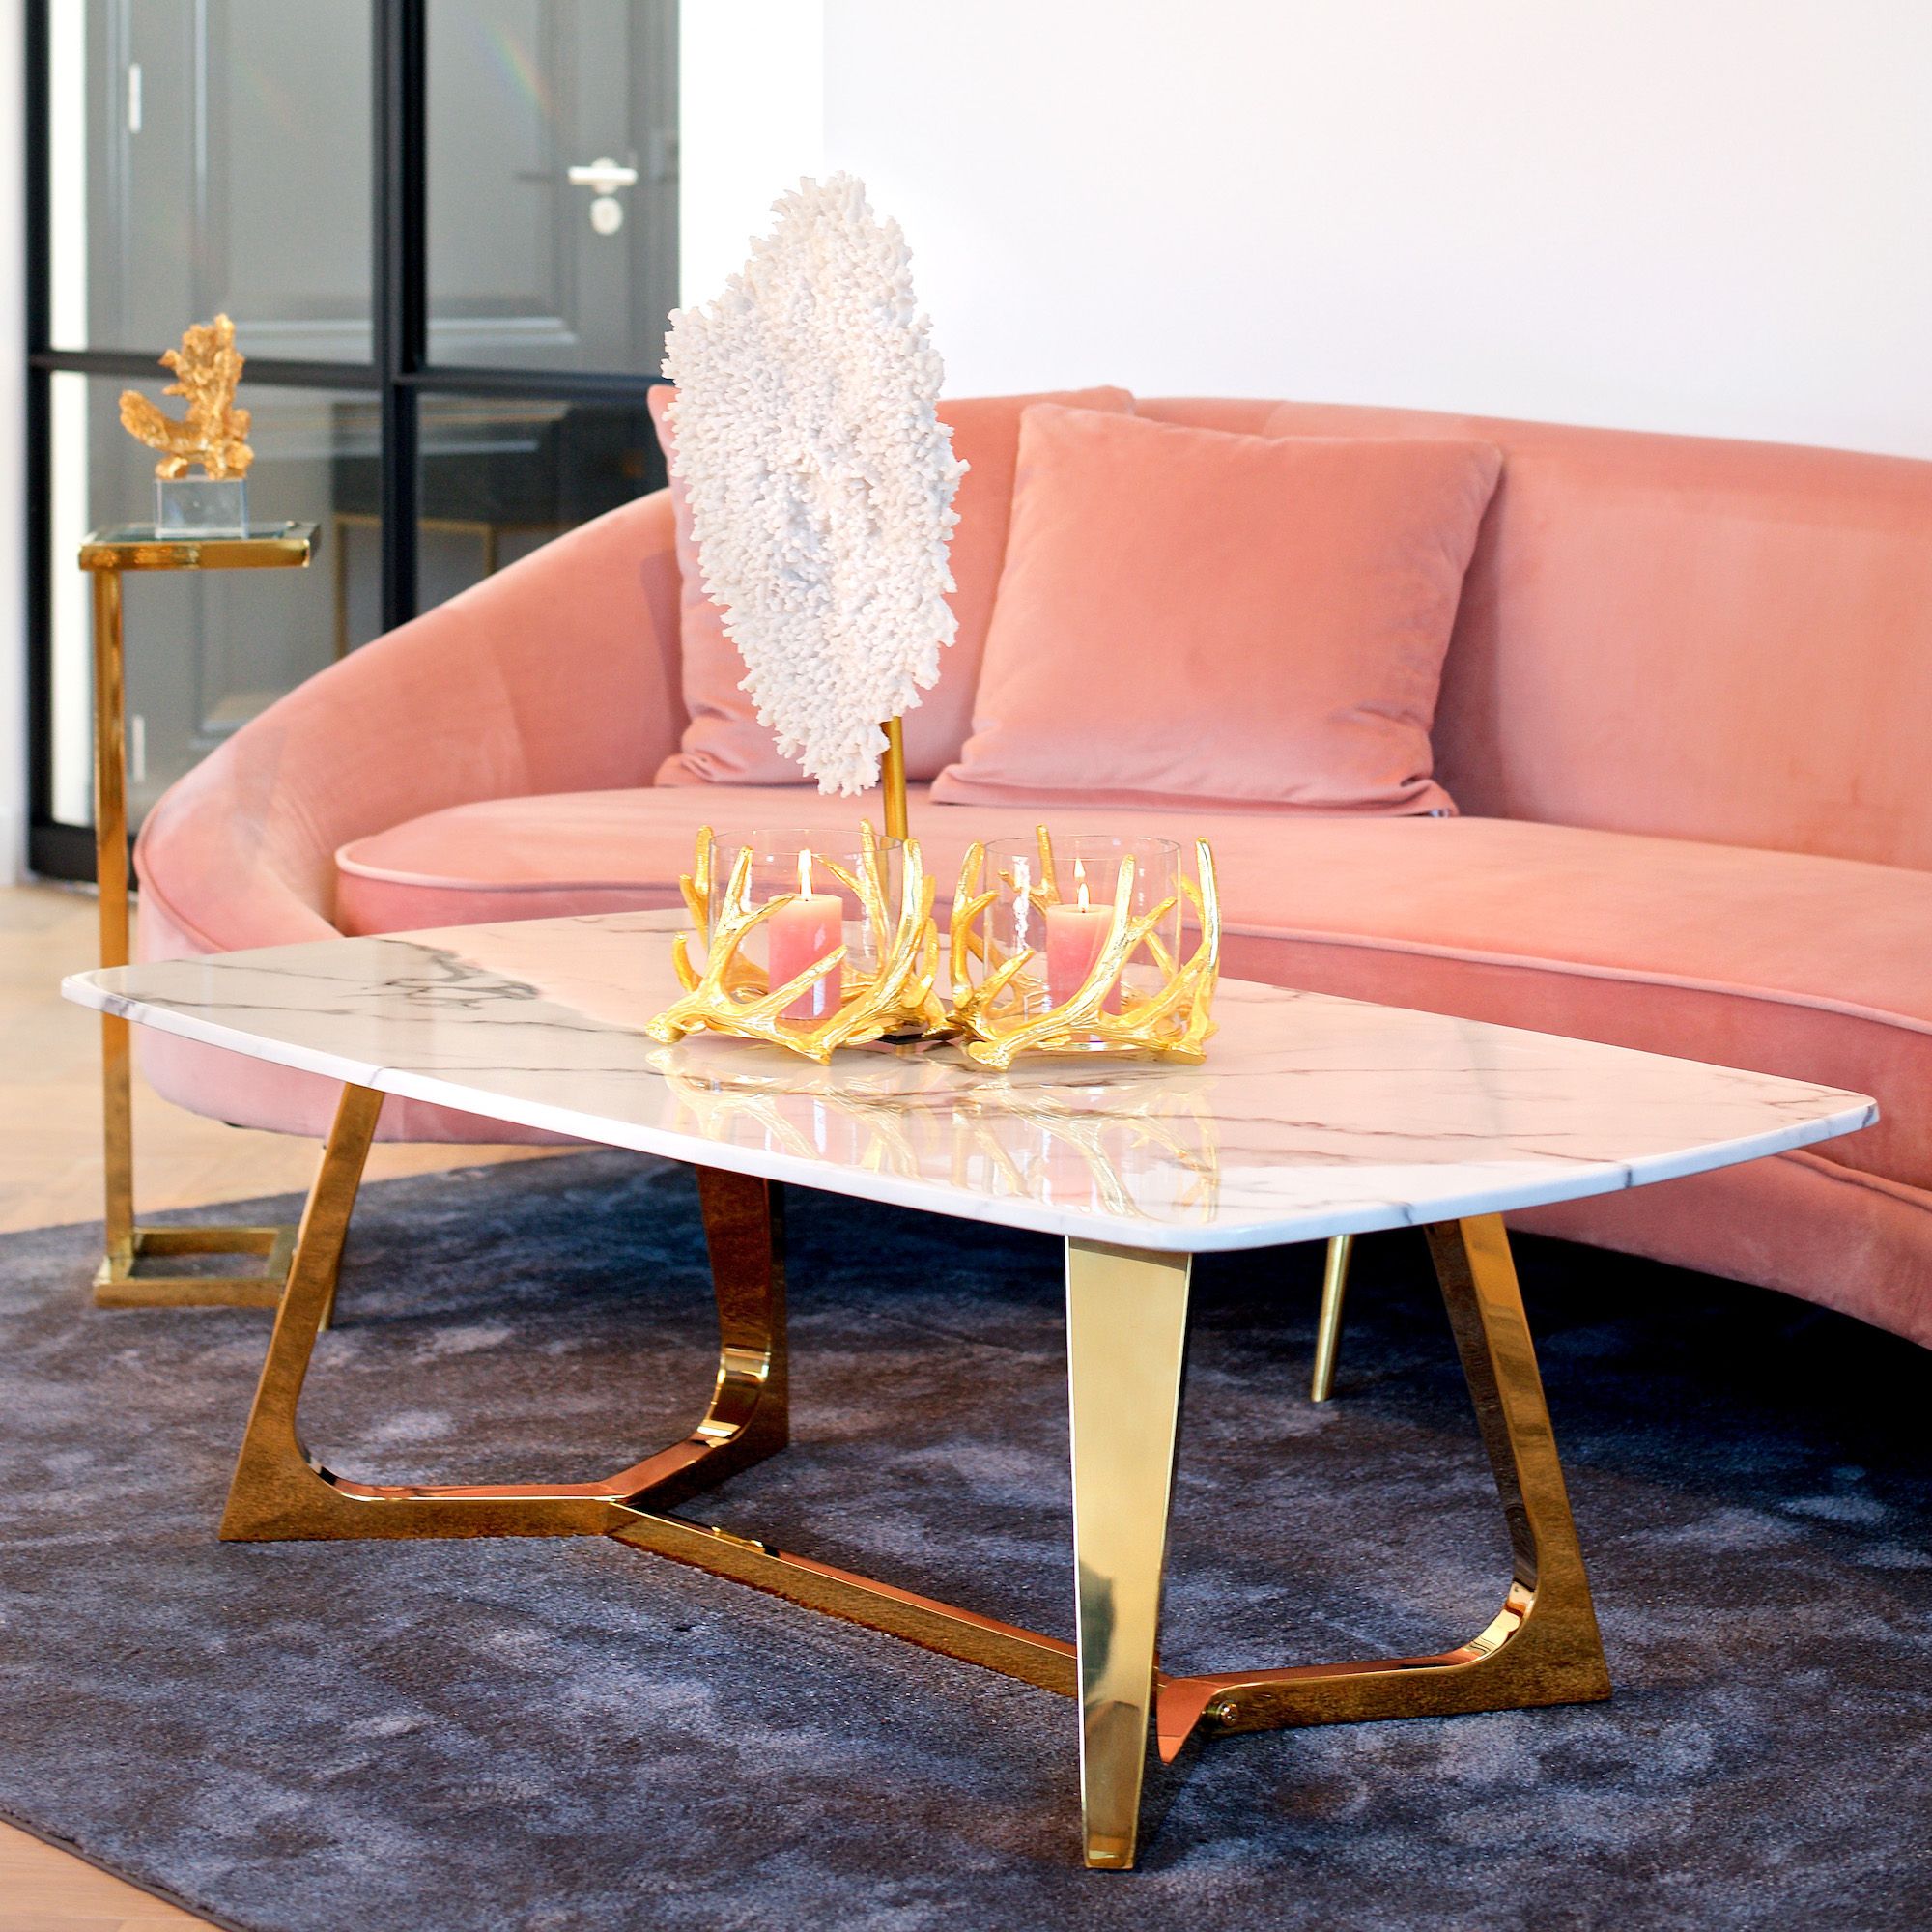 Contemporary Faux Marble And Gold Finish Coffee Table – Juliettes Interiors With Regard To Most Current Faux Marble Gold Coffee Tables (View 16 of 20)